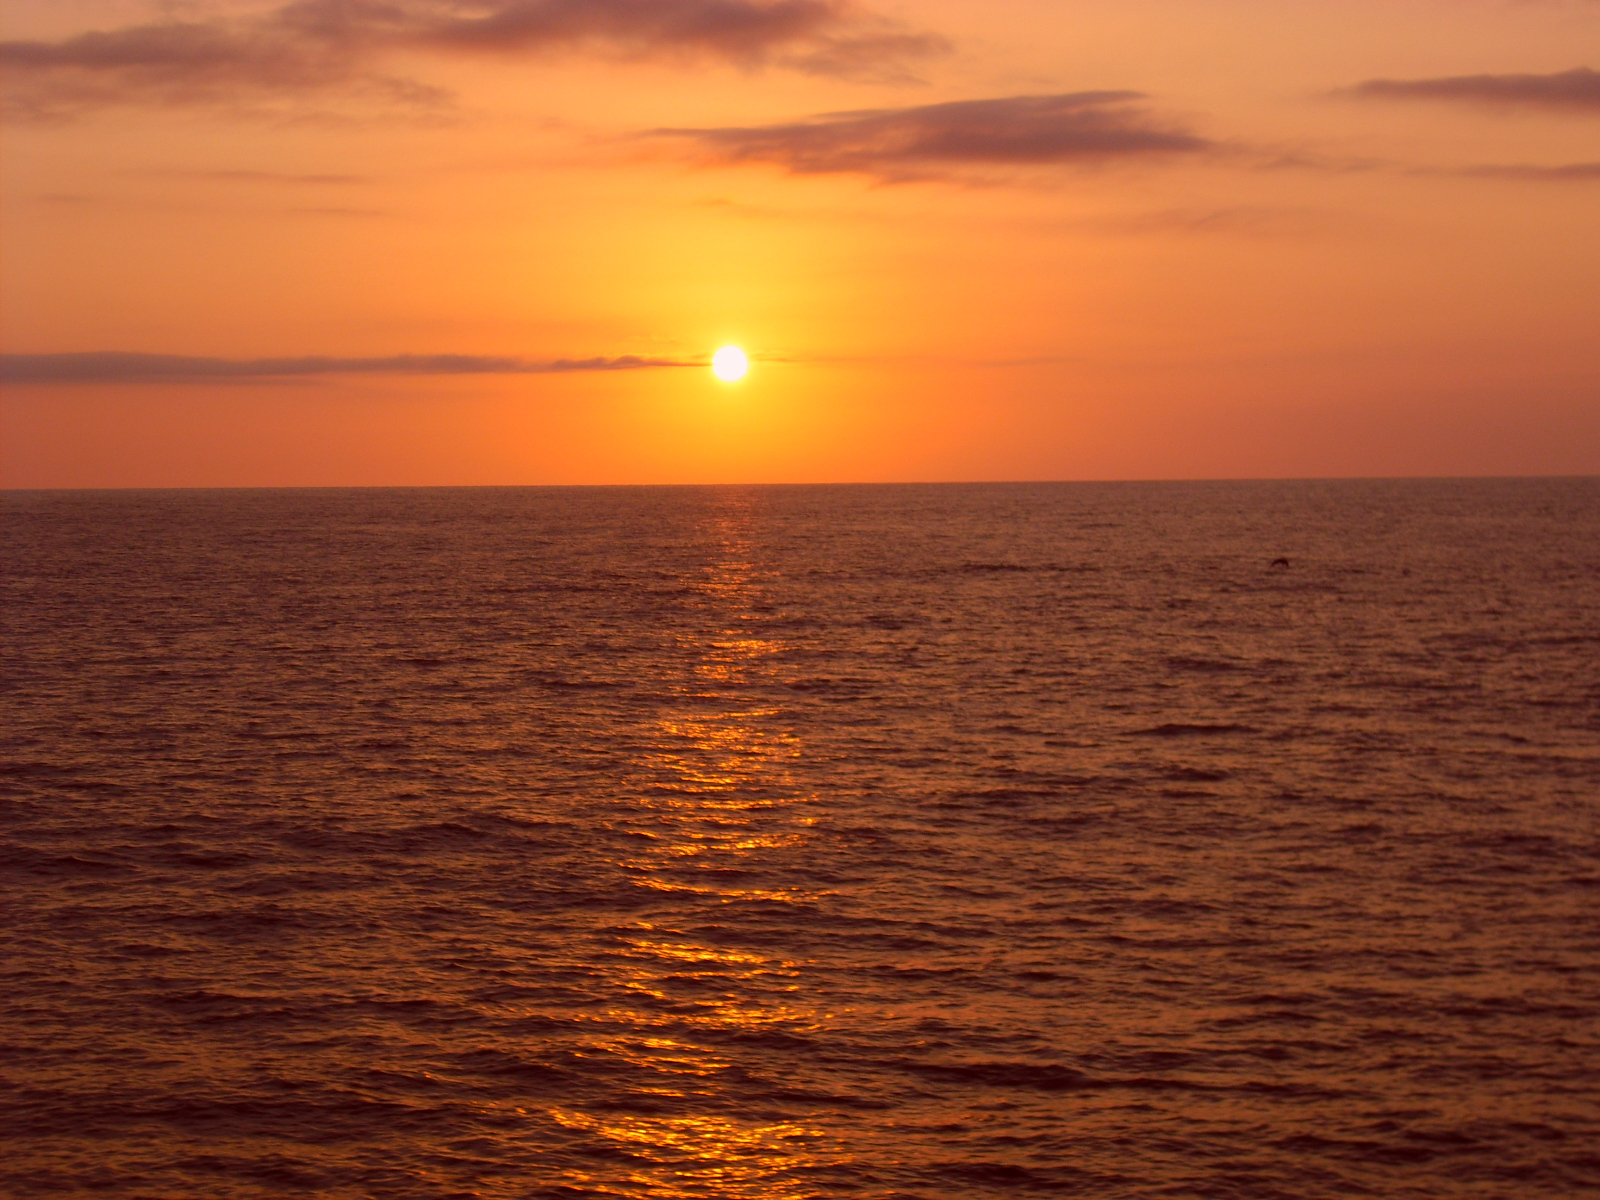 Sunset on Colombia's Pacific limits.